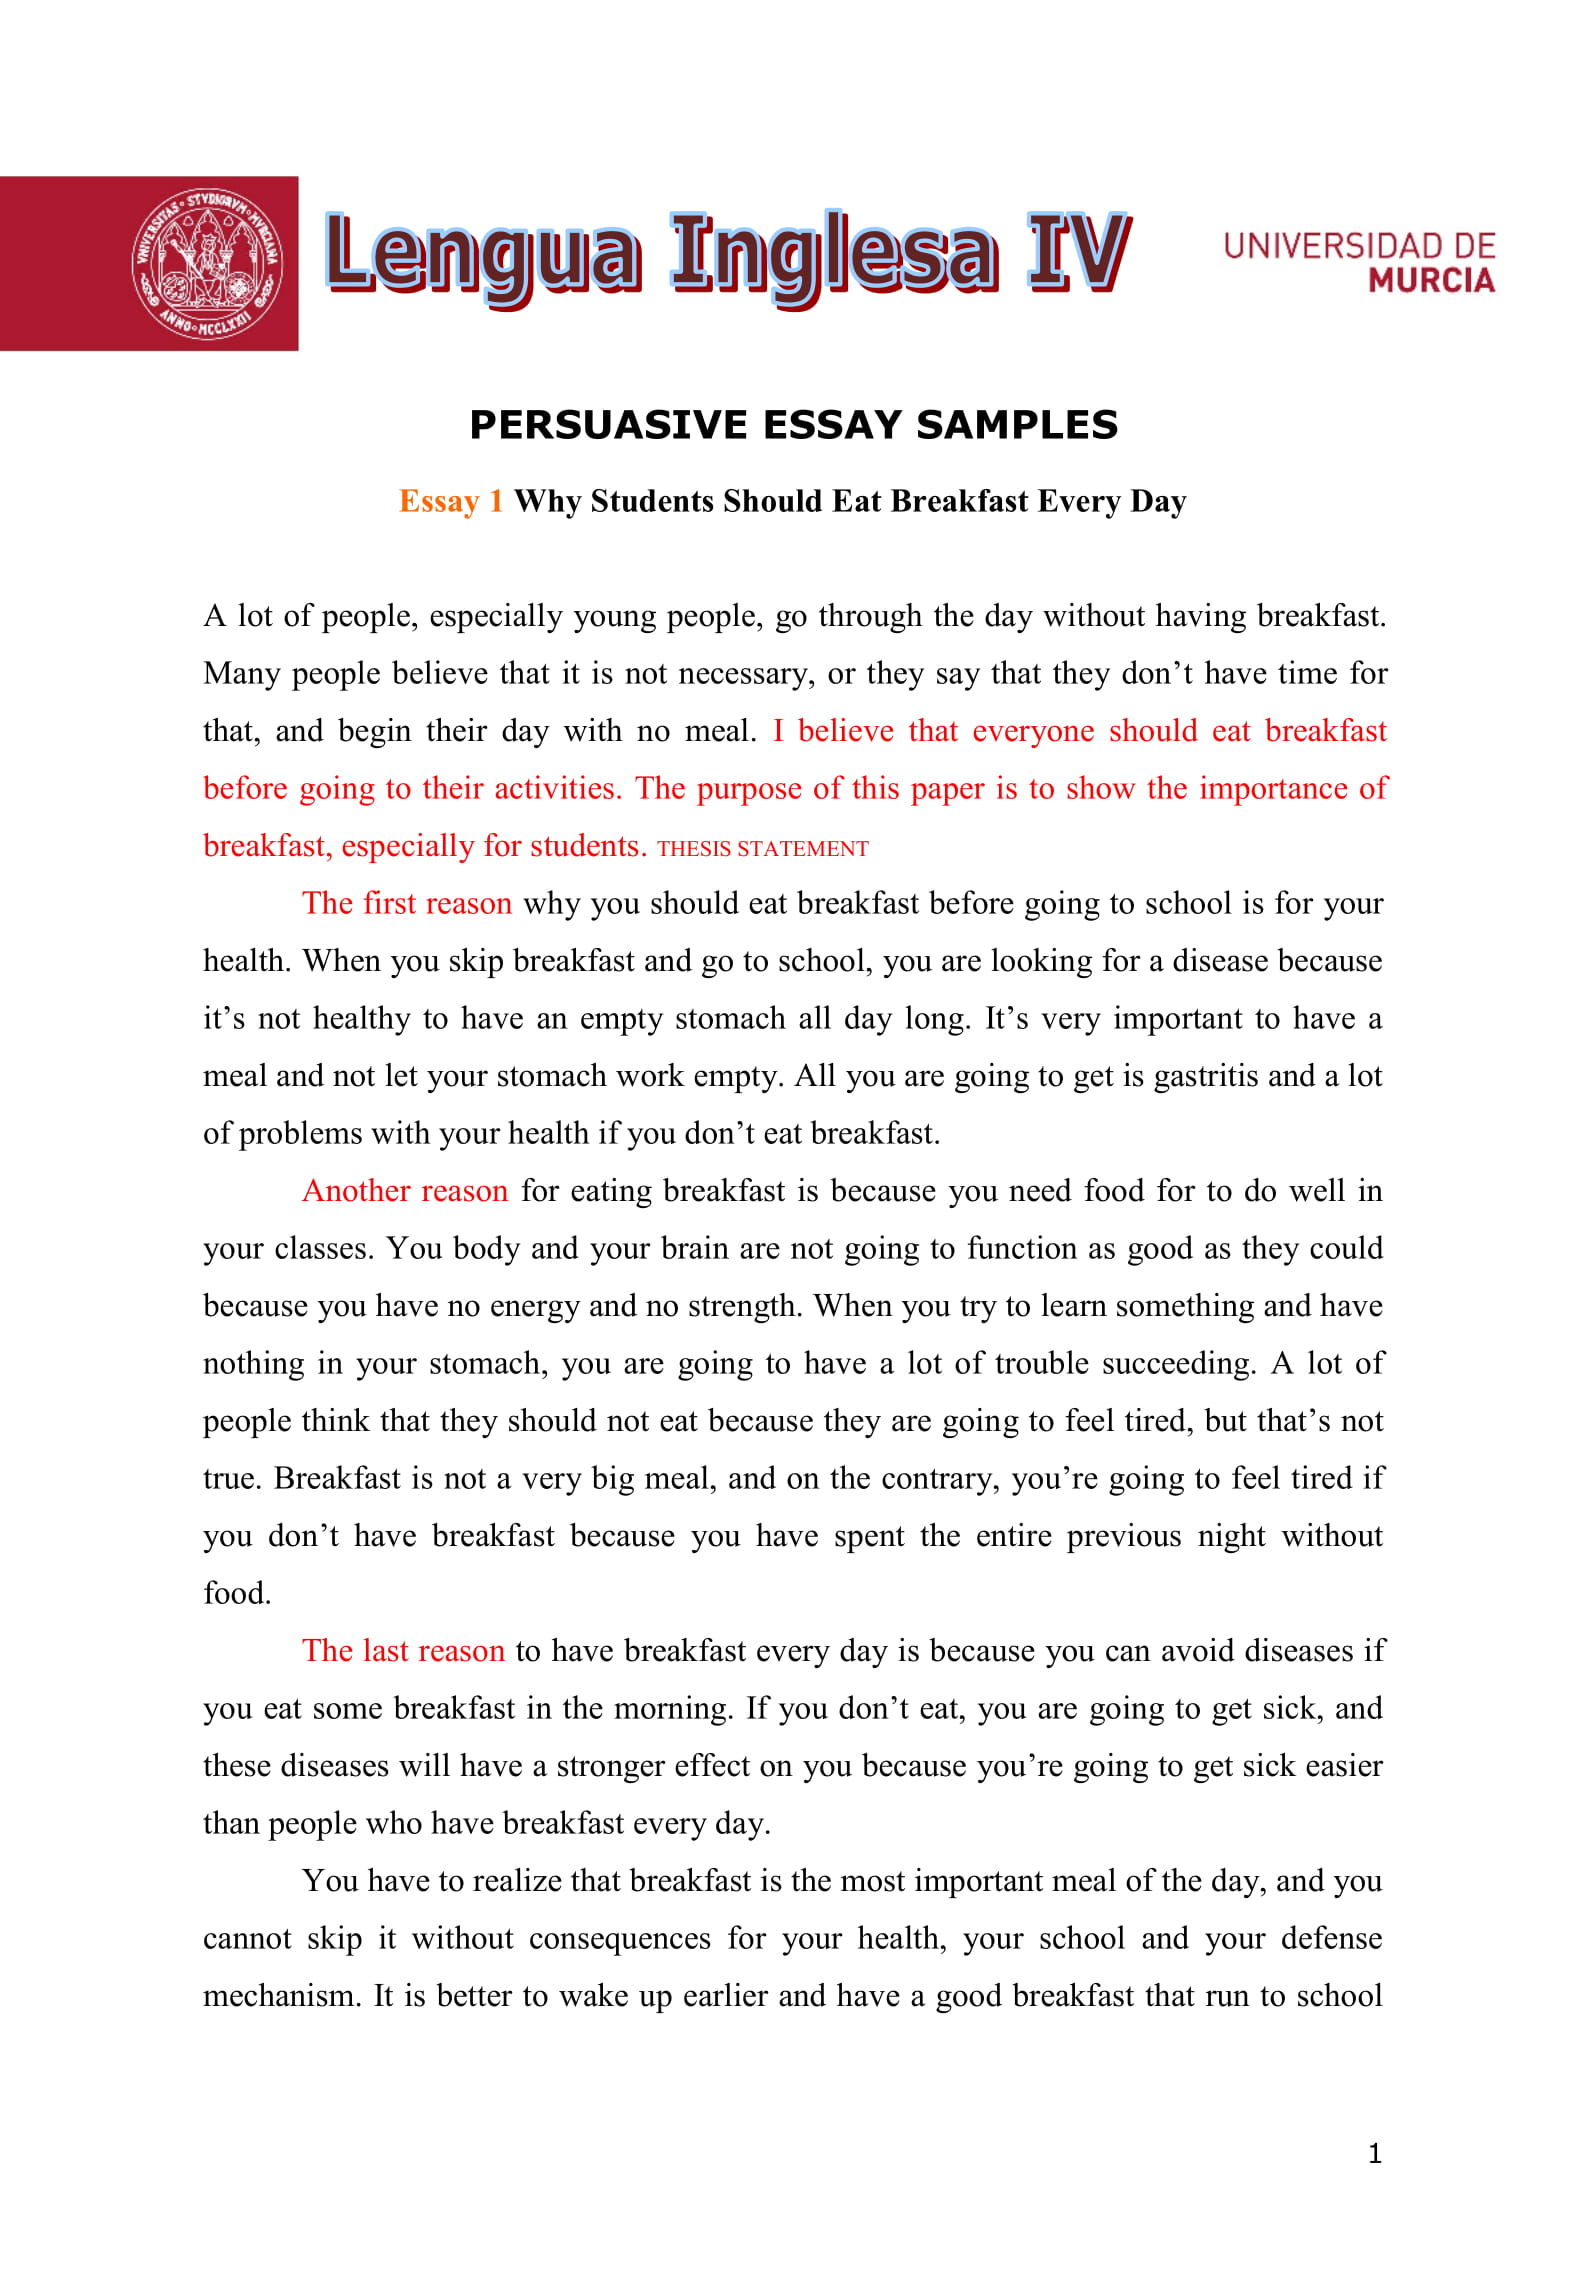 How to essay examples